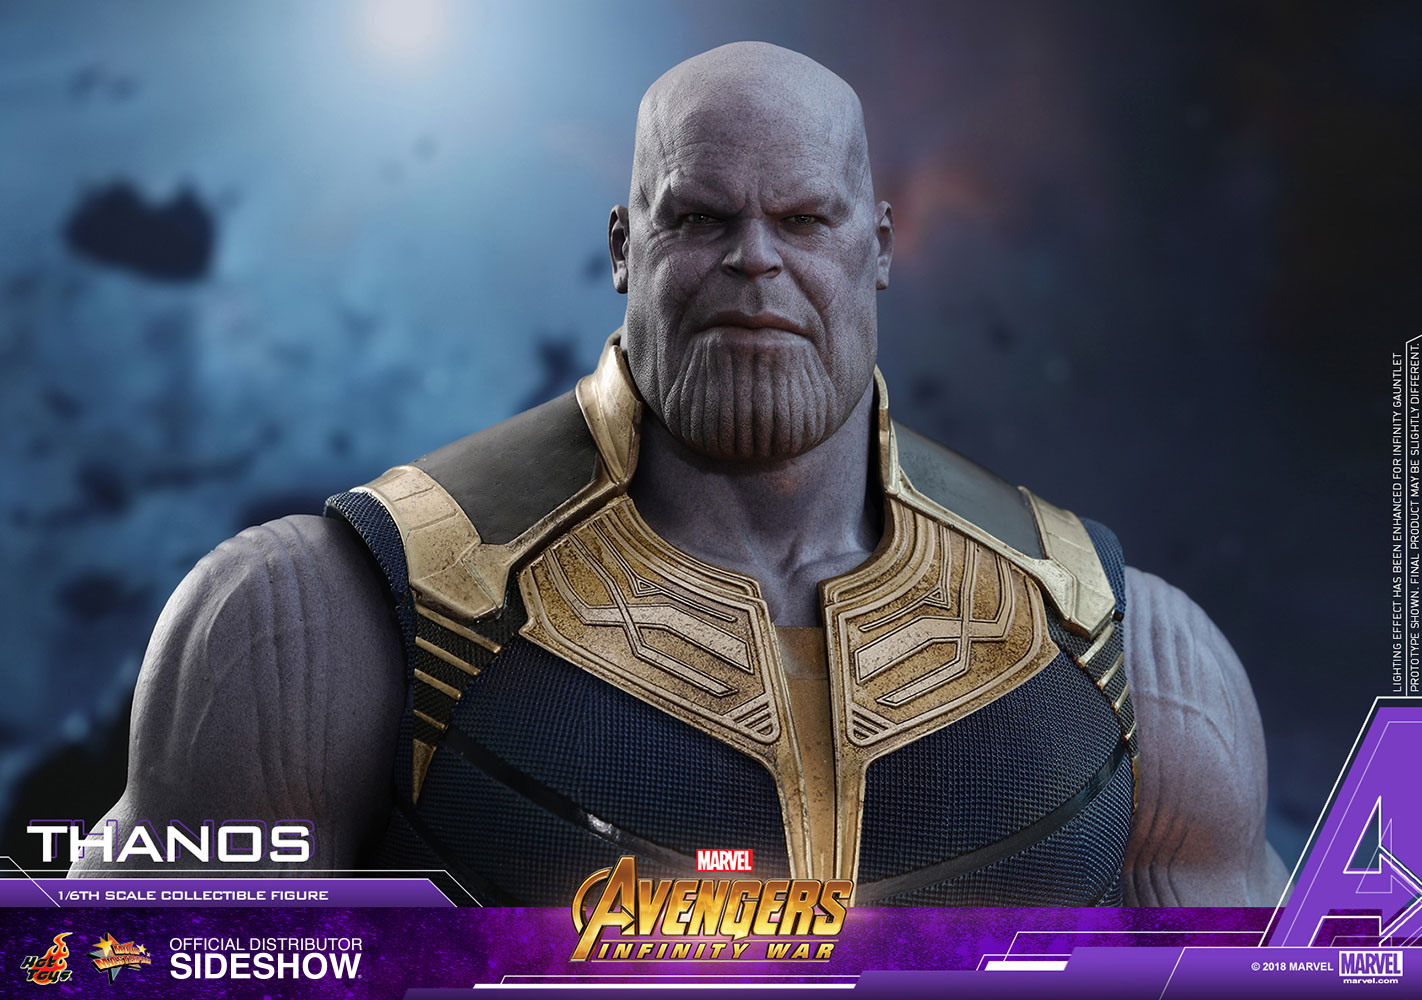 marvel-avengers-infinity-war-thanos-sixth-scale-figure-hot-toys-903429-23